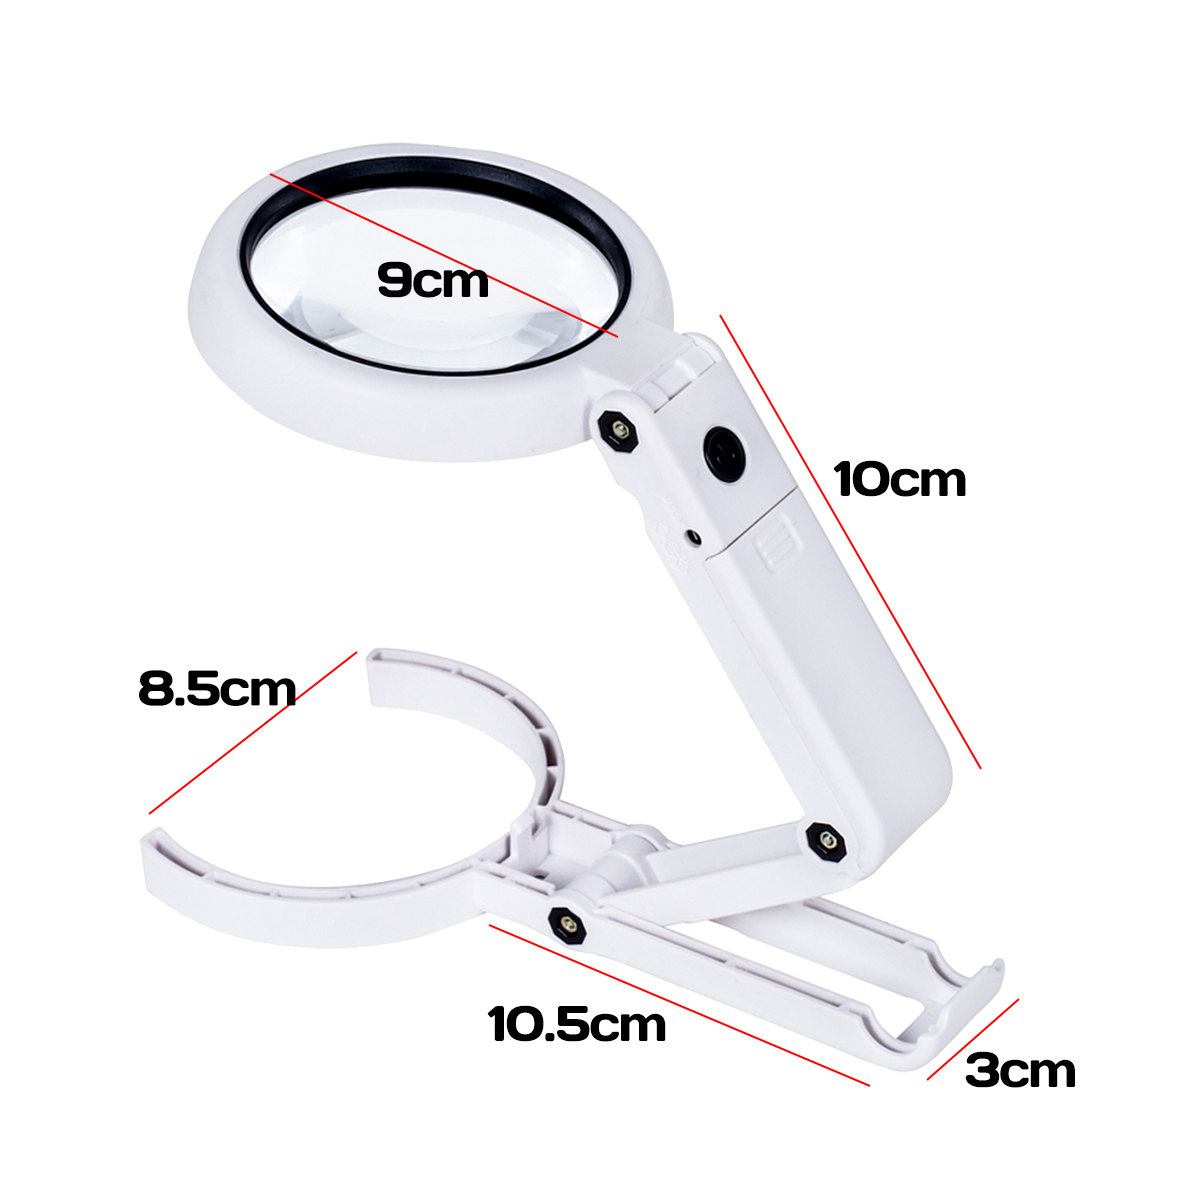 Handheld-Portable-Foldable-Lamp-Illuminated-Magnifier-5X-11X-Magnifying-Table-8-LED-Lights-Loupe-Mag-1472829-4